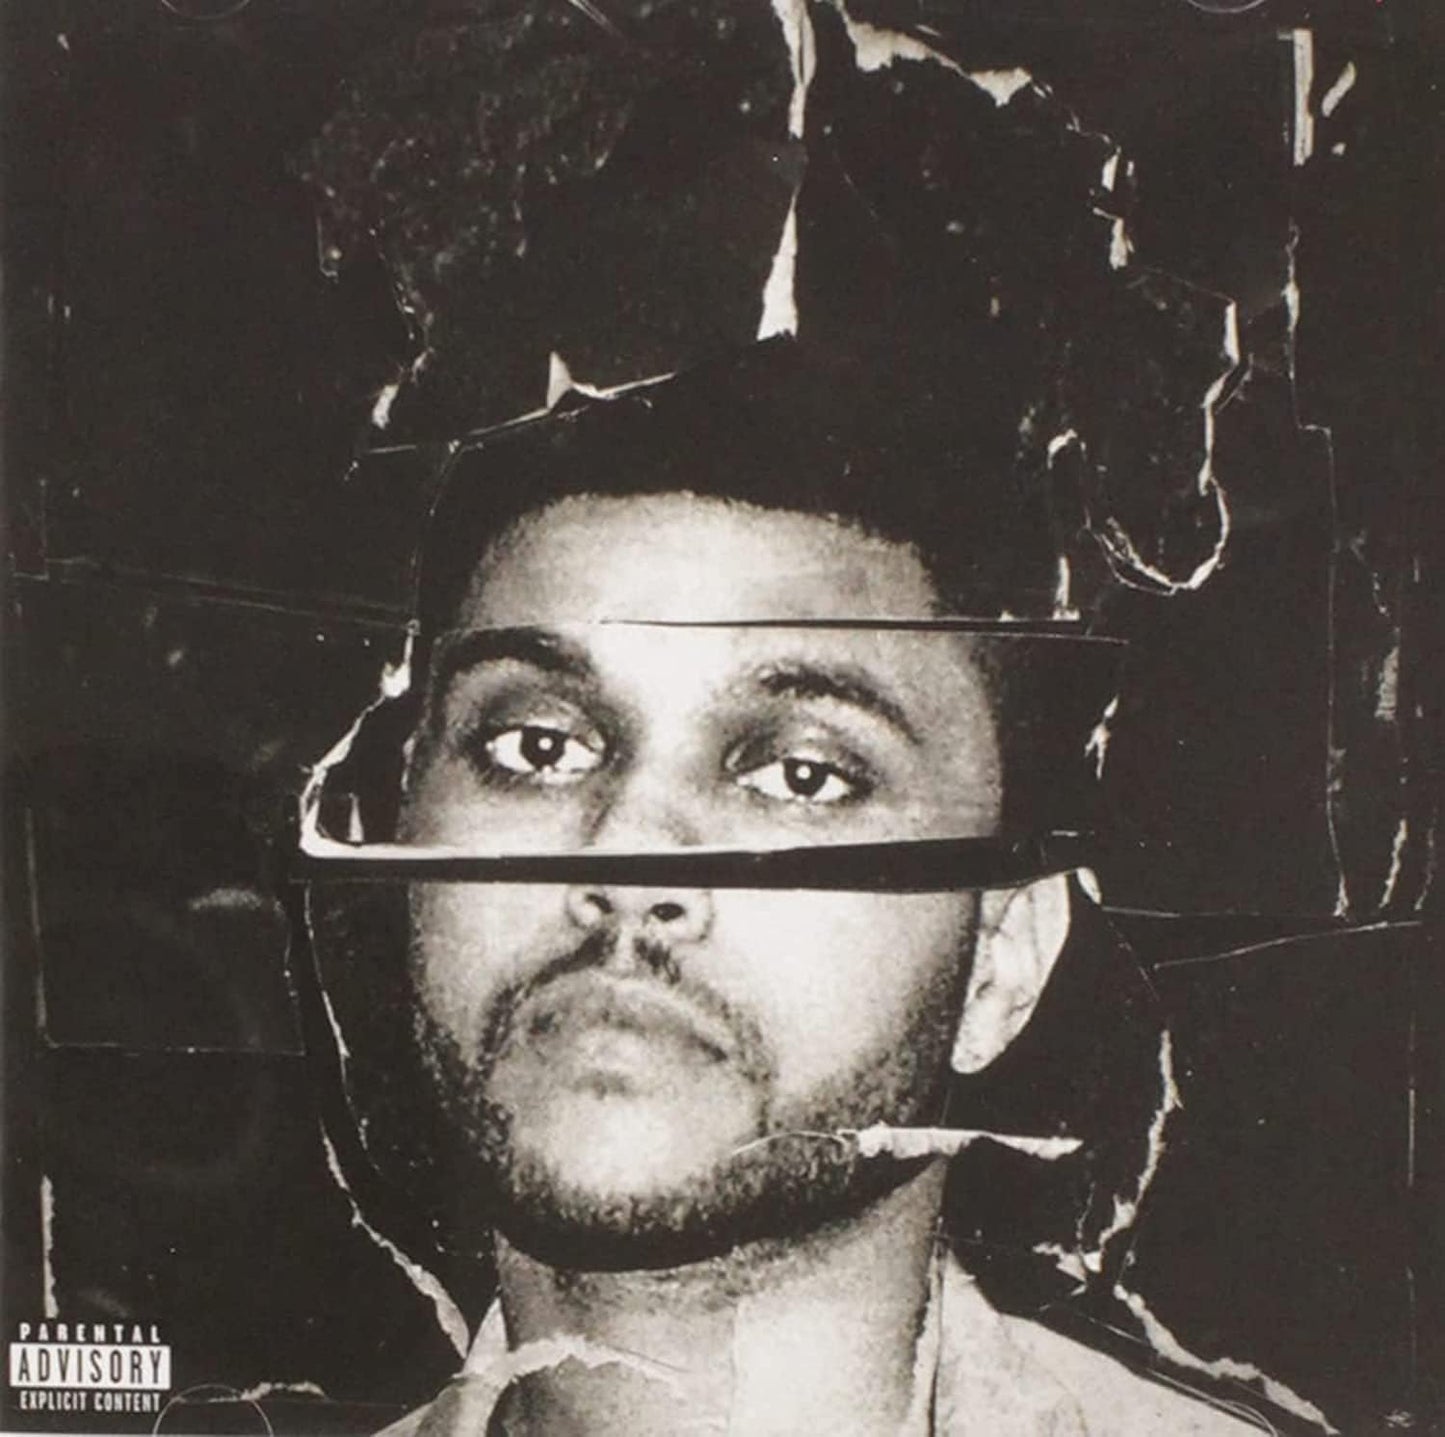 2LP - The Weeknd - Beauty Behind the Madness